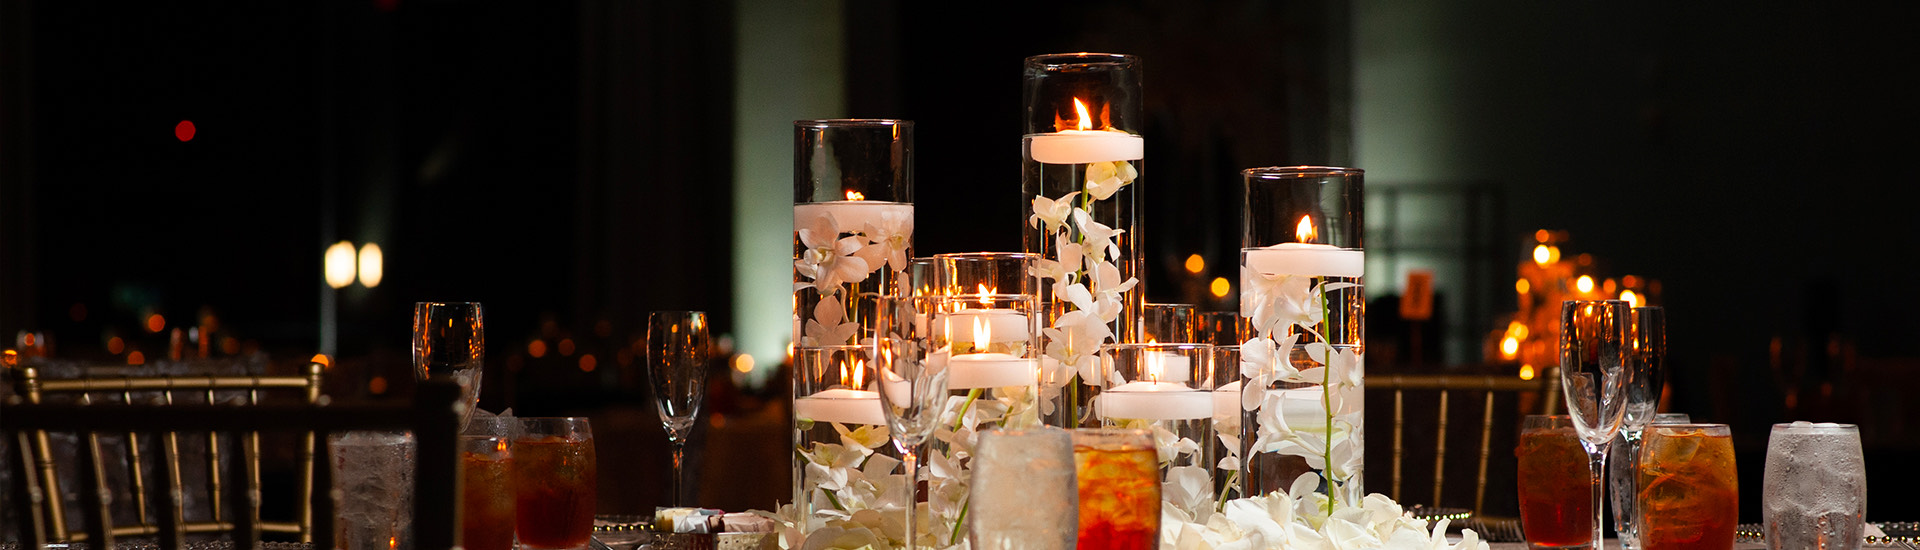 wedding table with drinks and candles in the center